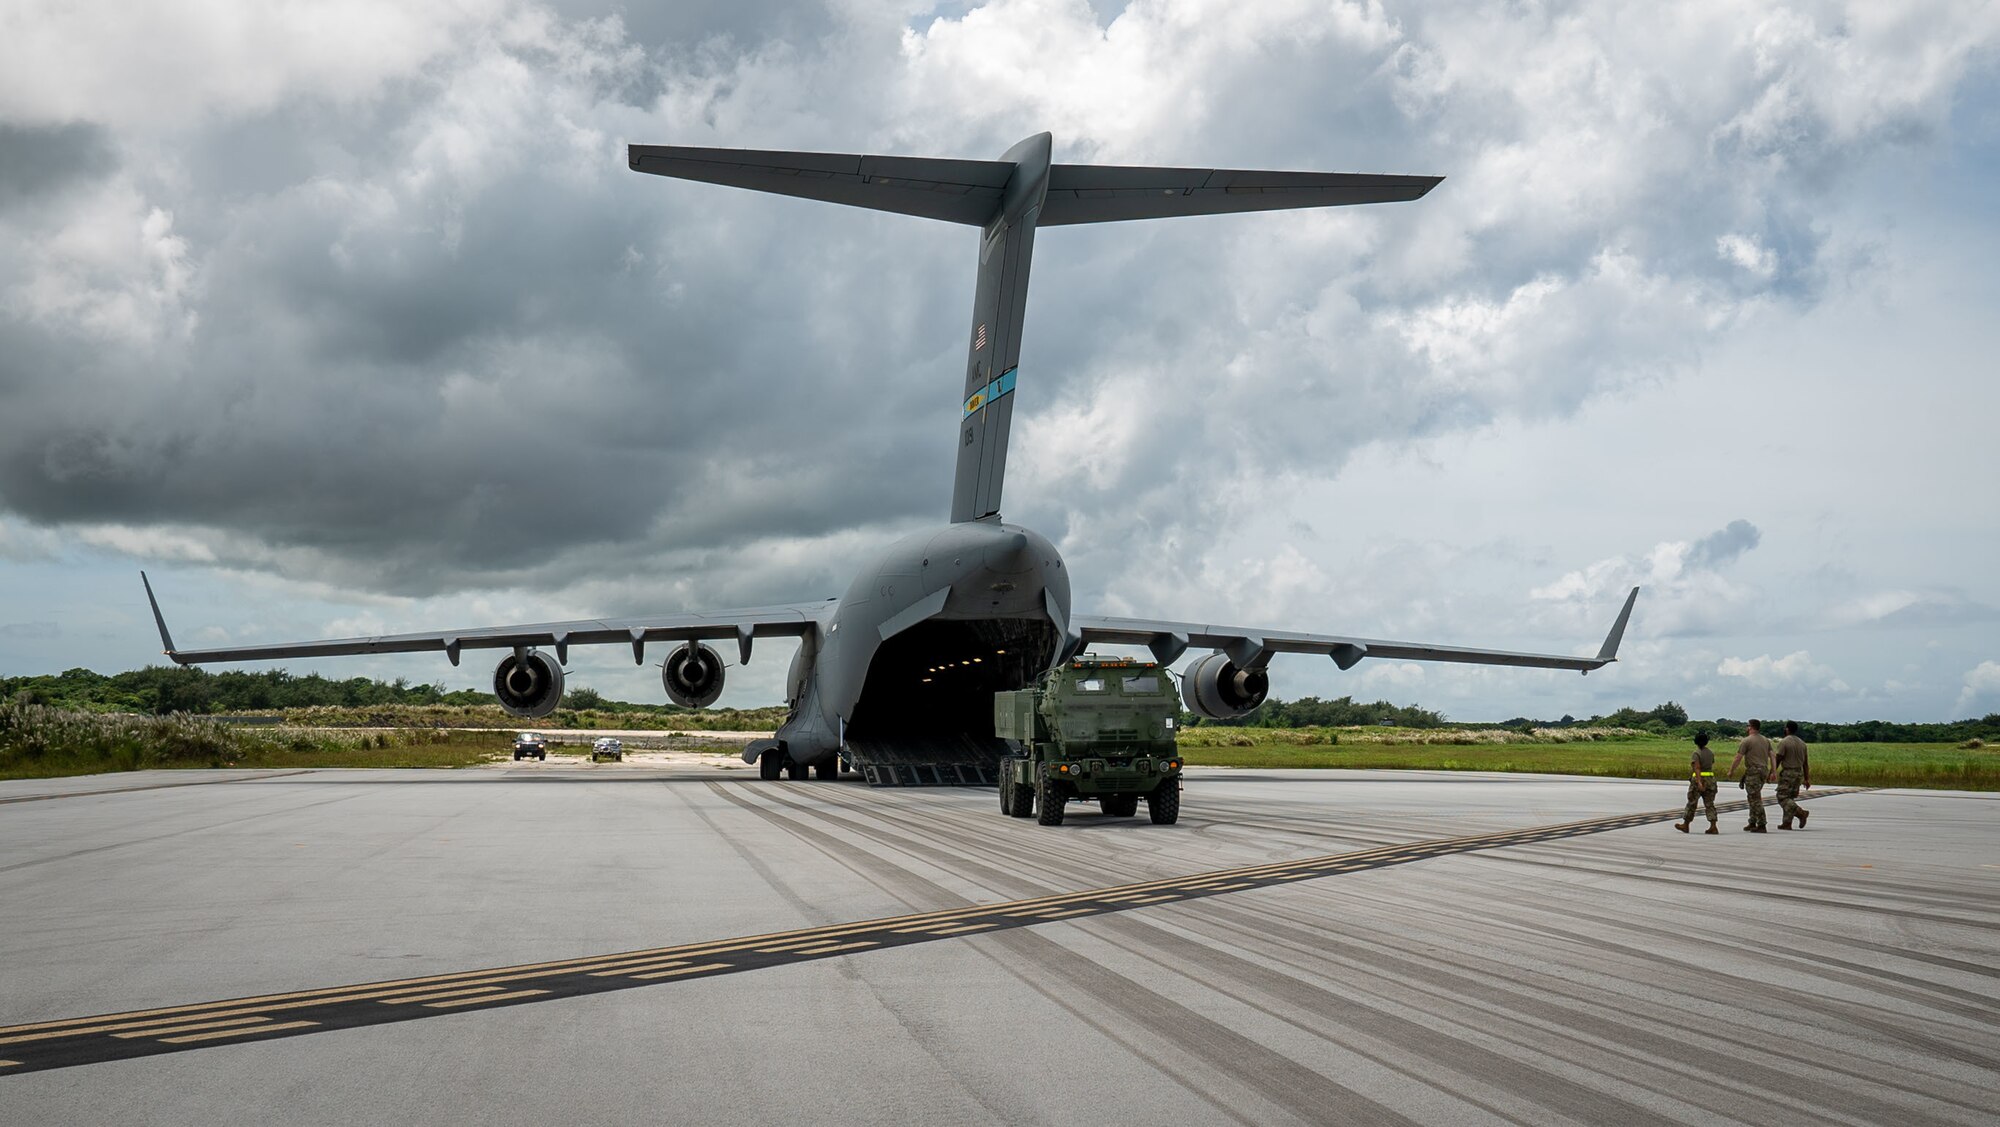 Members of the U.S. Army prepare to load a High Mobility Artillery Rocket System onto a U.S. Air Force C-17 Globemaster III assigned to Dover Air Force Base, Delaware, during Exercise GOLDEN BEE at Andersen Air Force Base, Guam, Sept. 26, 2022.  Exercise GOLDEN BEE is a joint readiness exercise led by Air Mobility Command and was designed to provide training integration and rehearse strategic and operational objectives in support of Agile Combat Employment initiatives in the Indo-Pacific area of responsibility. (U.S. Air Force photo by 1st Lt. Jade Watkins)